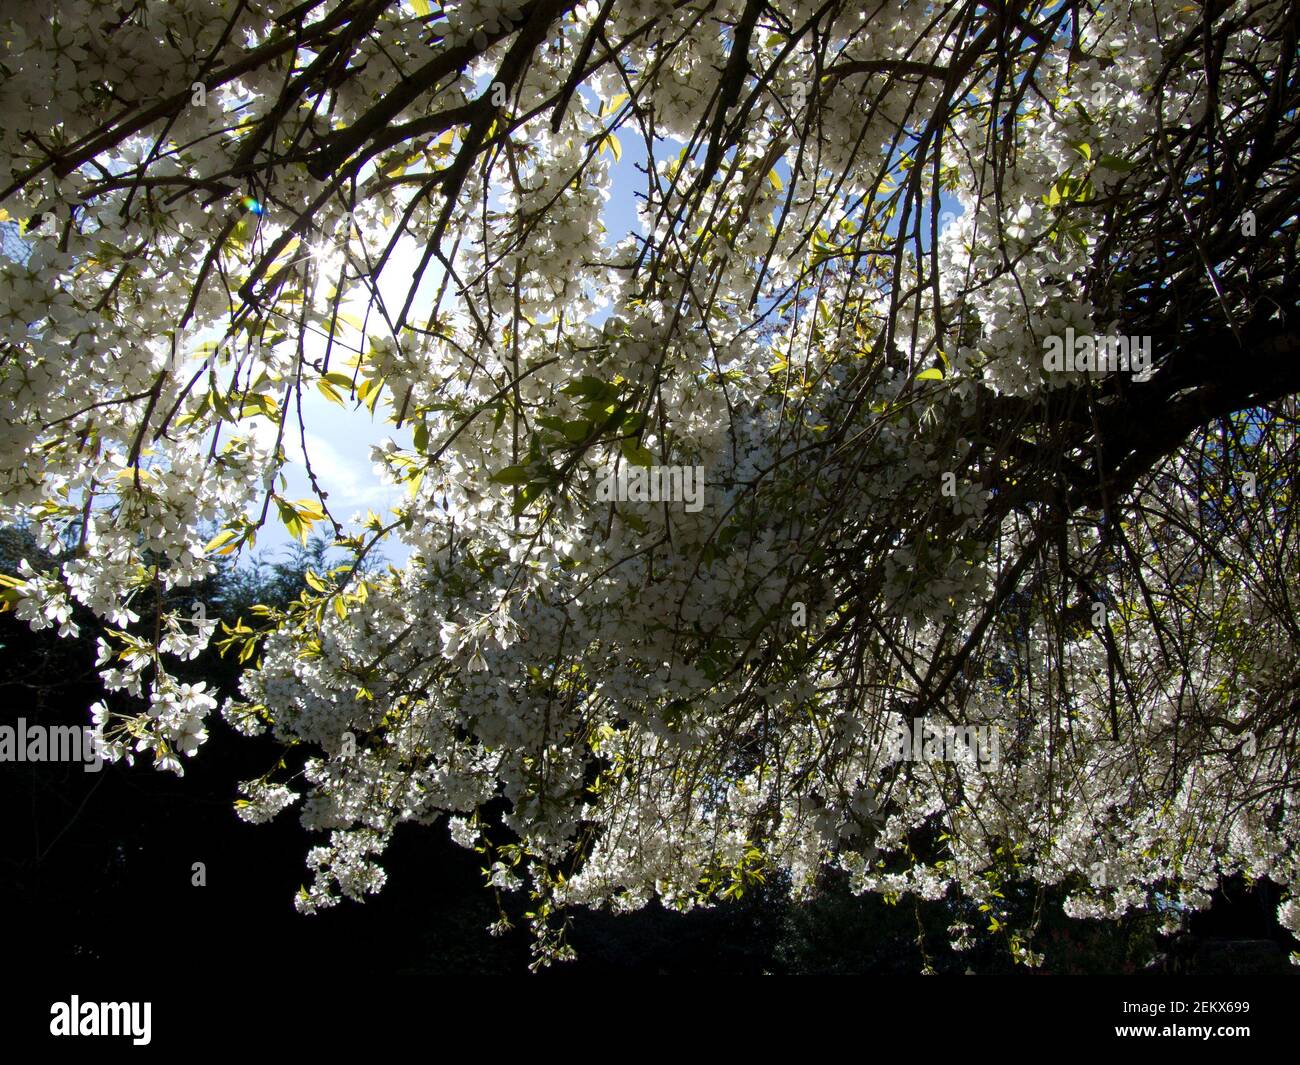 tree blossoms, flowering tree, spring, apple blossoms, canopy, sun shining through, sprouting, flowers, nature, apple tree, park, parkland Stock Photo